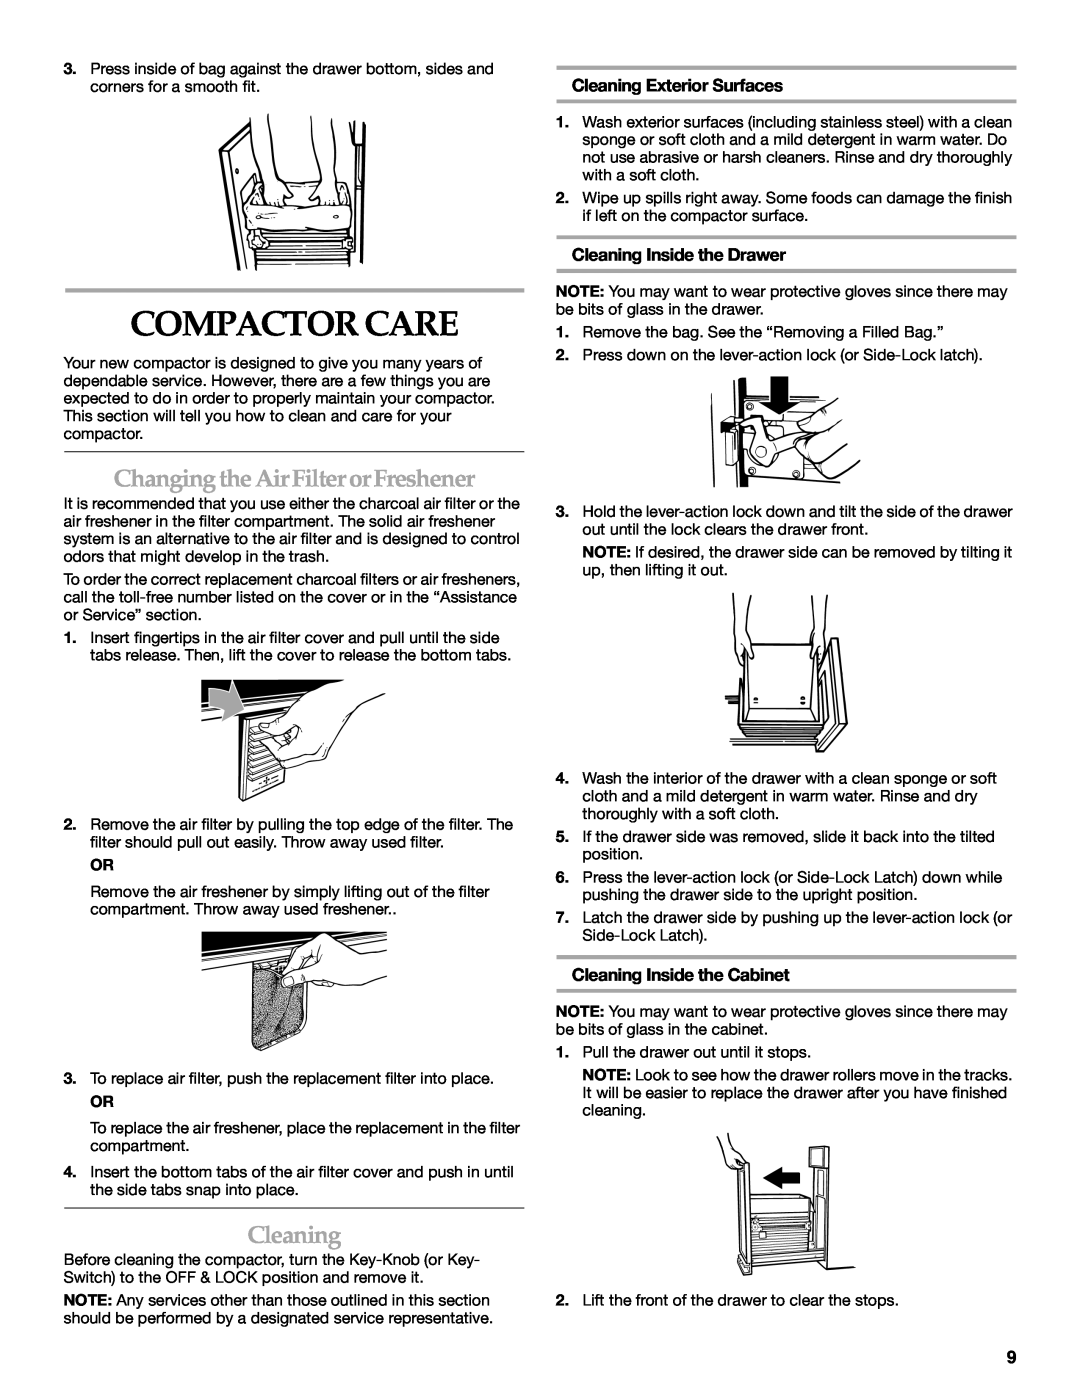 KitchenAid 9871915B manual Compactor Care, Changing the AirFilter orFreshener, Cleaning Exterior Surfaces 